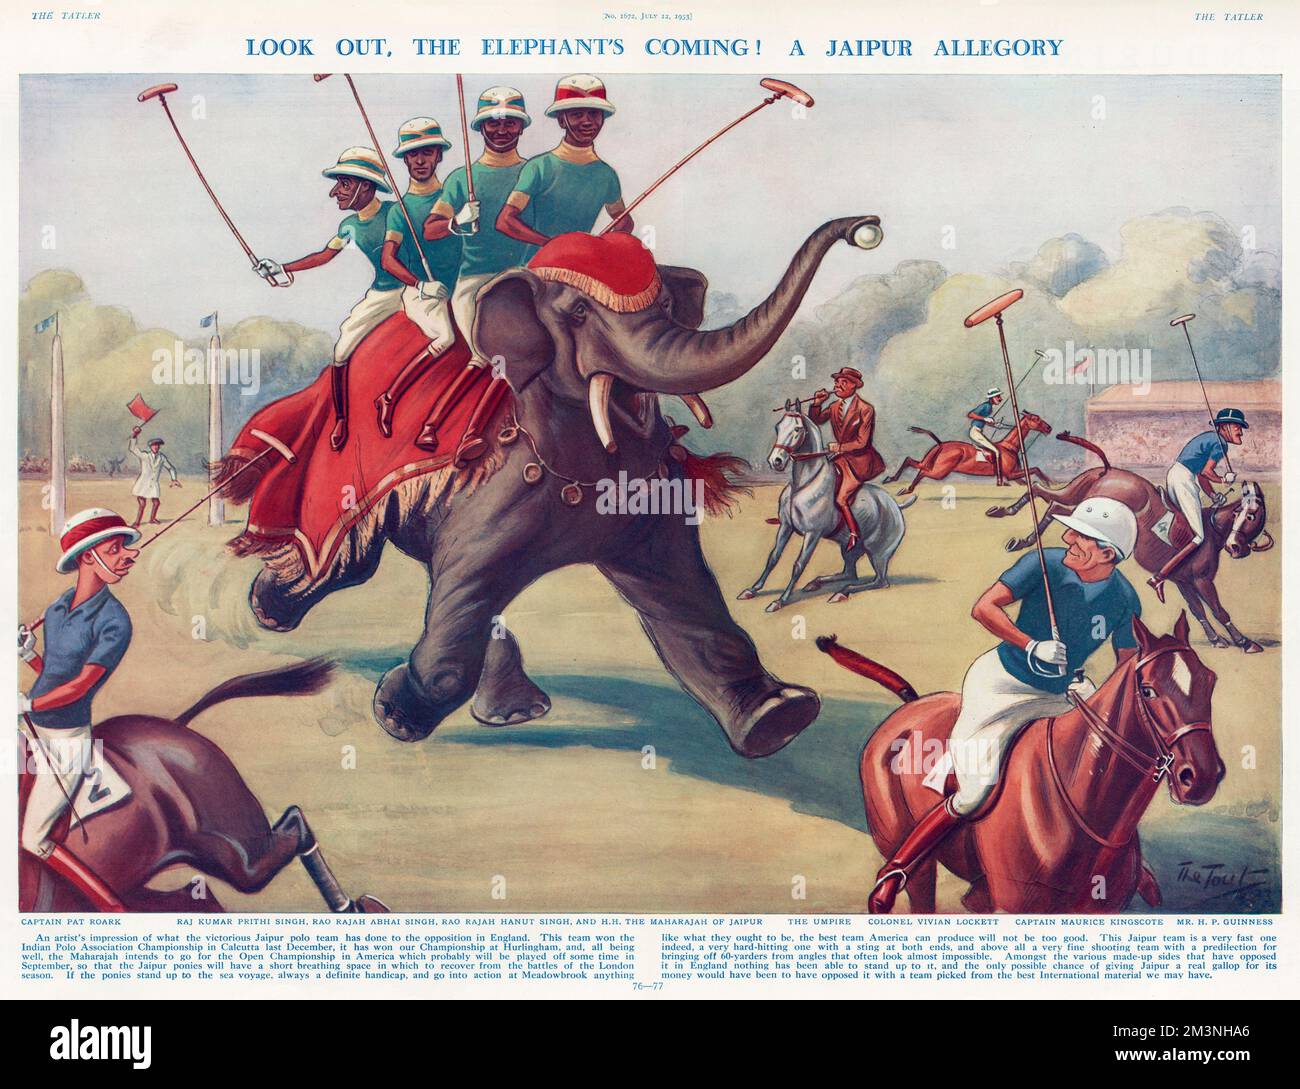 Look Out, The Elephant's Coming!  An artist's impression of the dominant Jaipur Polo team. Having won the Indian Polo Association Championship in December 1932, the team were victorious in six consecutive tournaments, including the Hurlingham Championship in England. From left, the Jaipur team shown are Raj Kumar Prithi Singh, Rao Rajah Abhai Singh, Rao Rajah Hanut Singh and H.H. The Maharajah of Jaipur. Other figures included in the illustration are, from left, Captain Pat Roark, Colonel Vivian Lockett (the umpire), Captain Maurice Kingscote and Mr H.P.Guinness  1933 Stock Photo